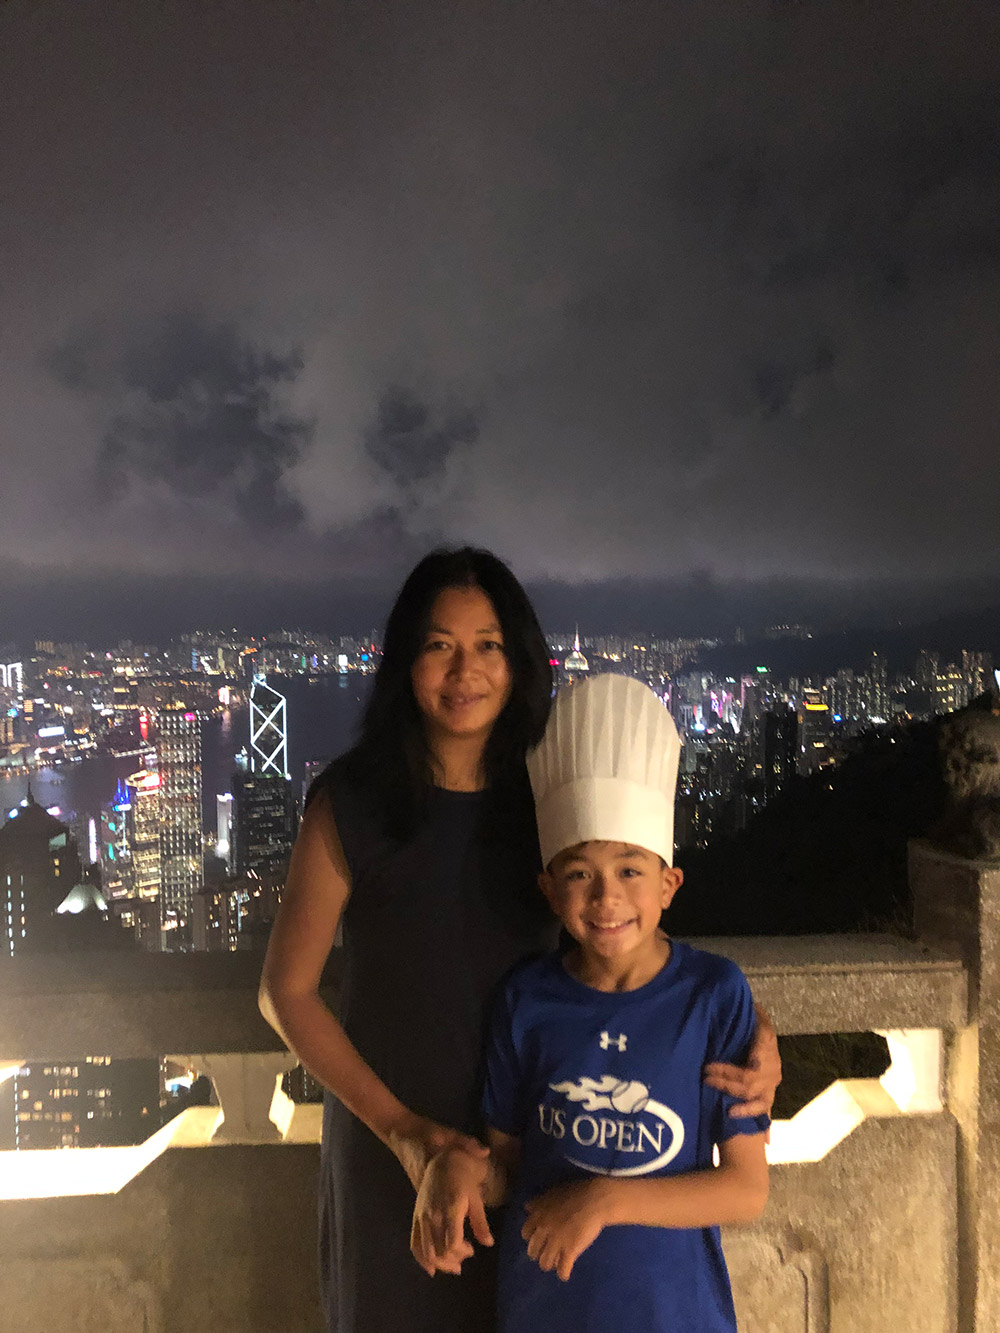 'Chef Oliver' enjoys the spectacular views of Hong Kong from Victoria Peak after an earlier visit to a fabulous dim sum restaurant with his mother, Tiffany. And yes, the food was amazing. August, 2019